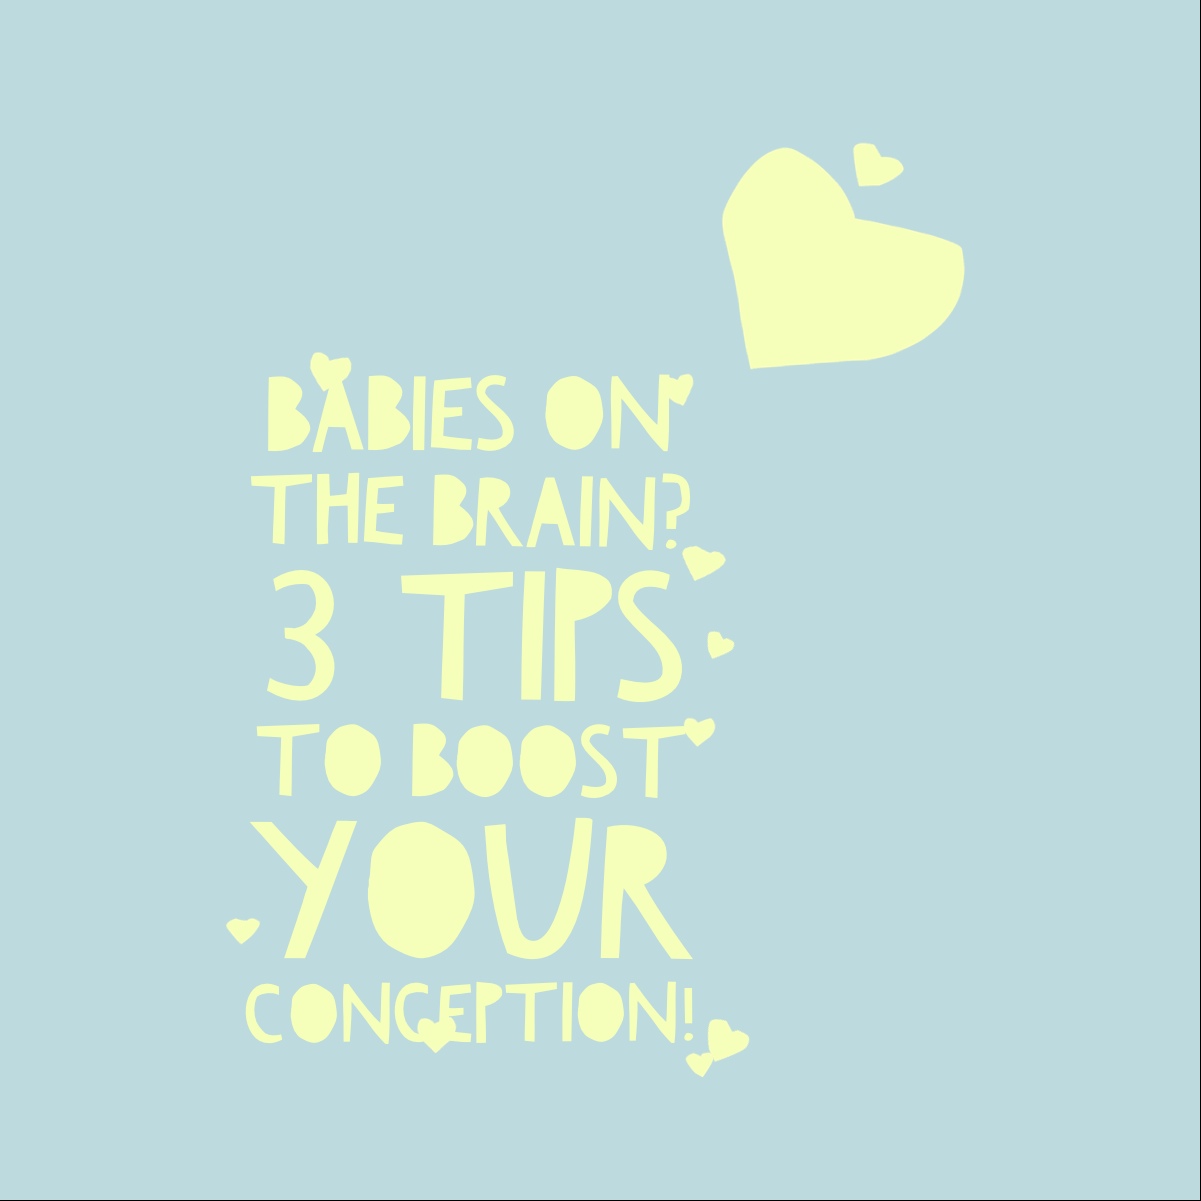 Babies on the Brain? 3 Tips to Boost your Conception!